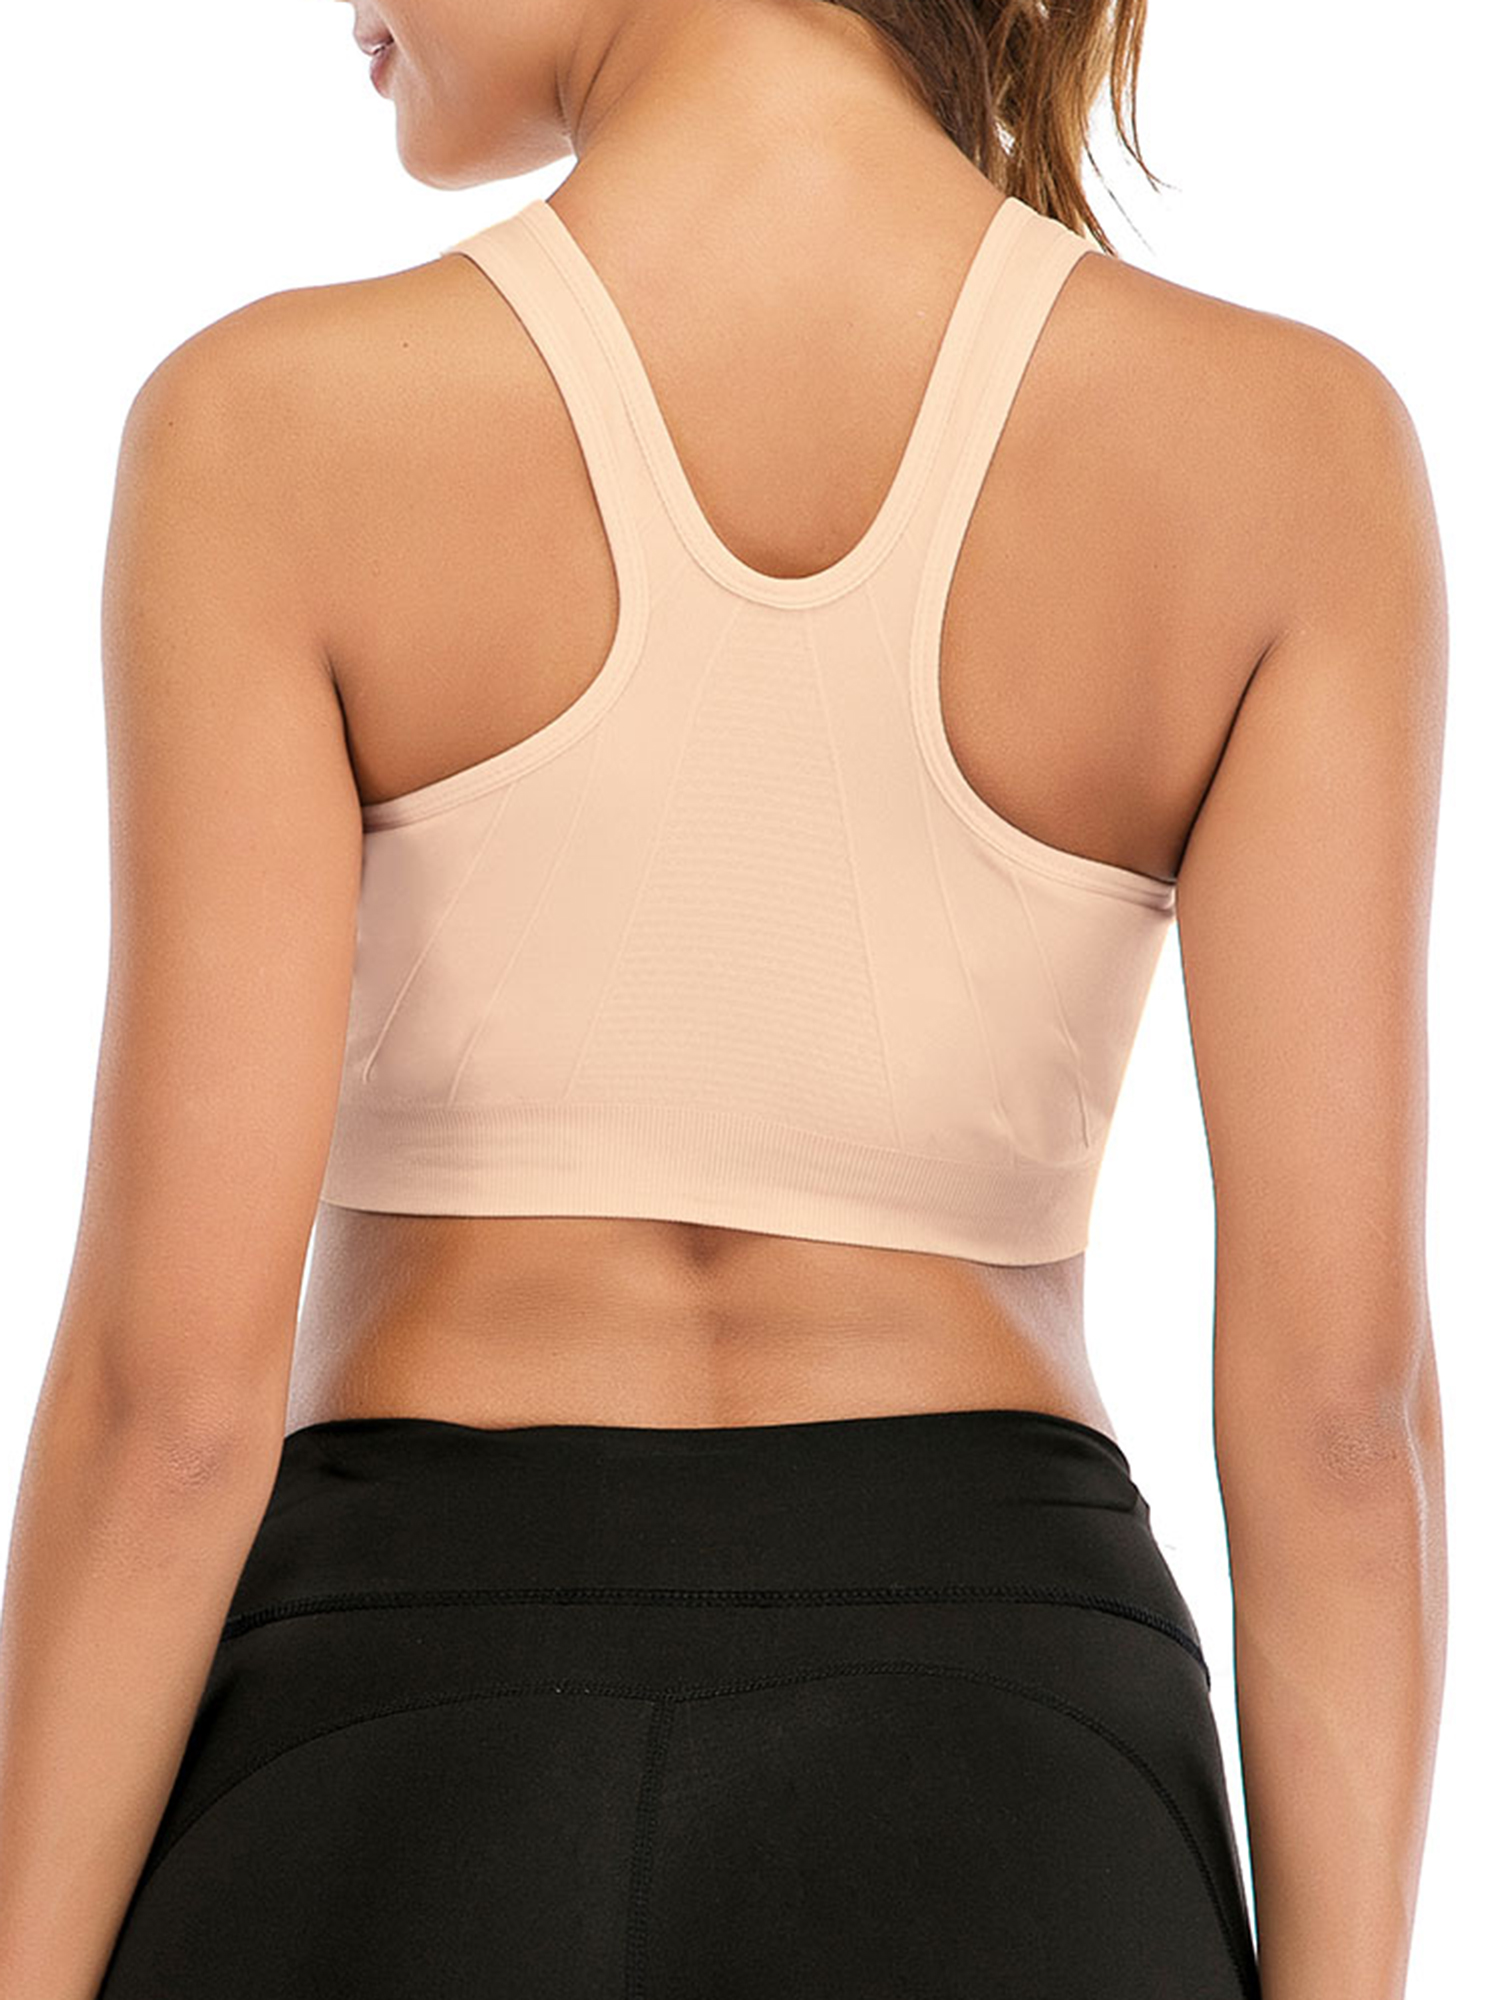 FUTATA Women's Front Zipper Sports Bra, Wireless Post-Op Bra Active Yoga Sports Bra For Gym Workout Running With Removable Pads, Available In Ten Colors S-2XL - image 5 of 8